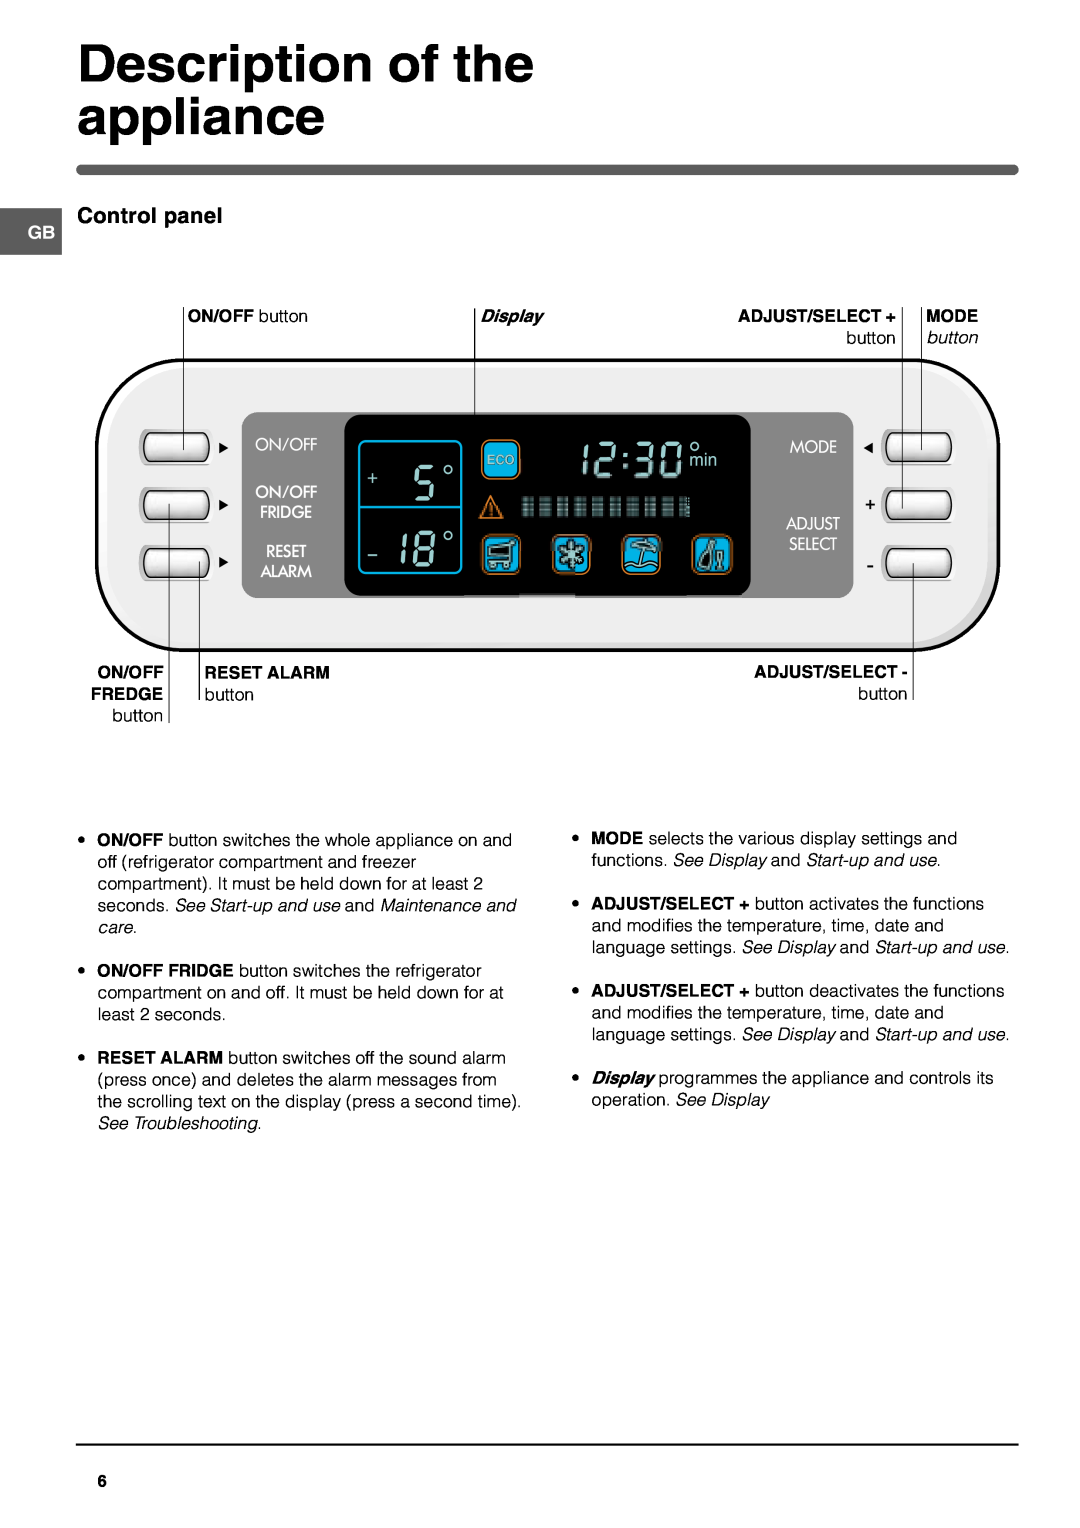 Hotpoint HME40N Description of the appliance, Control panel, ON/OFF button, On/Off Fridge Reset Alarm, Fredge, Display 